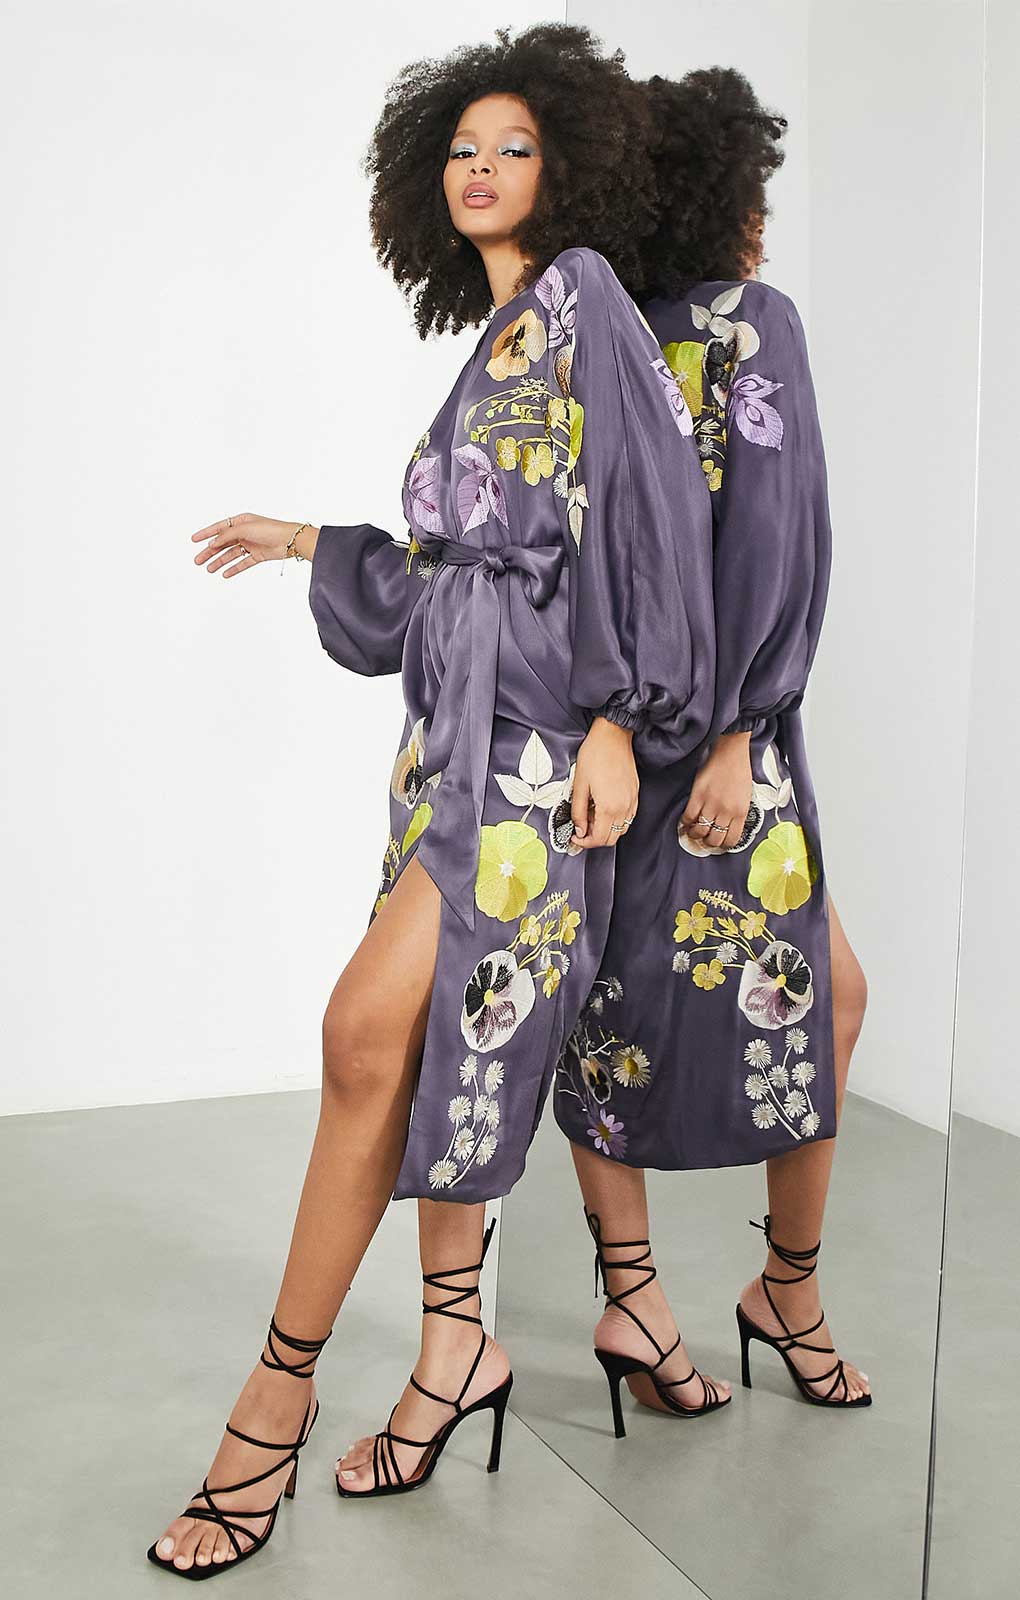 Asos Edition Satin Midi Dress In Pansy Floral Embroidery In Mauve product image